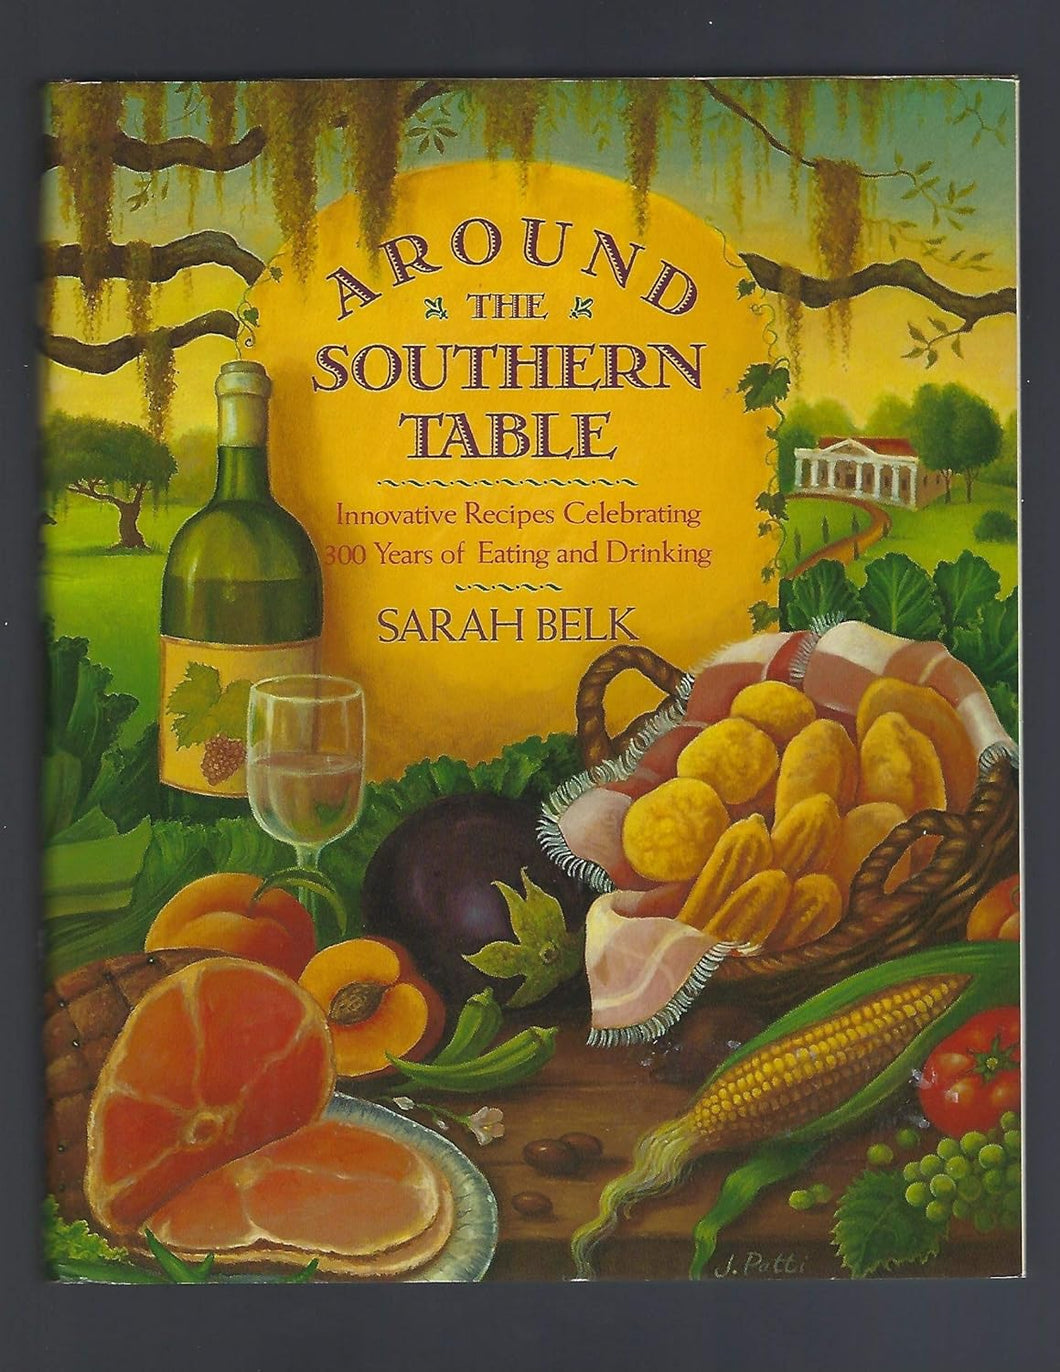 Around the Southern Table by Sarah Belk